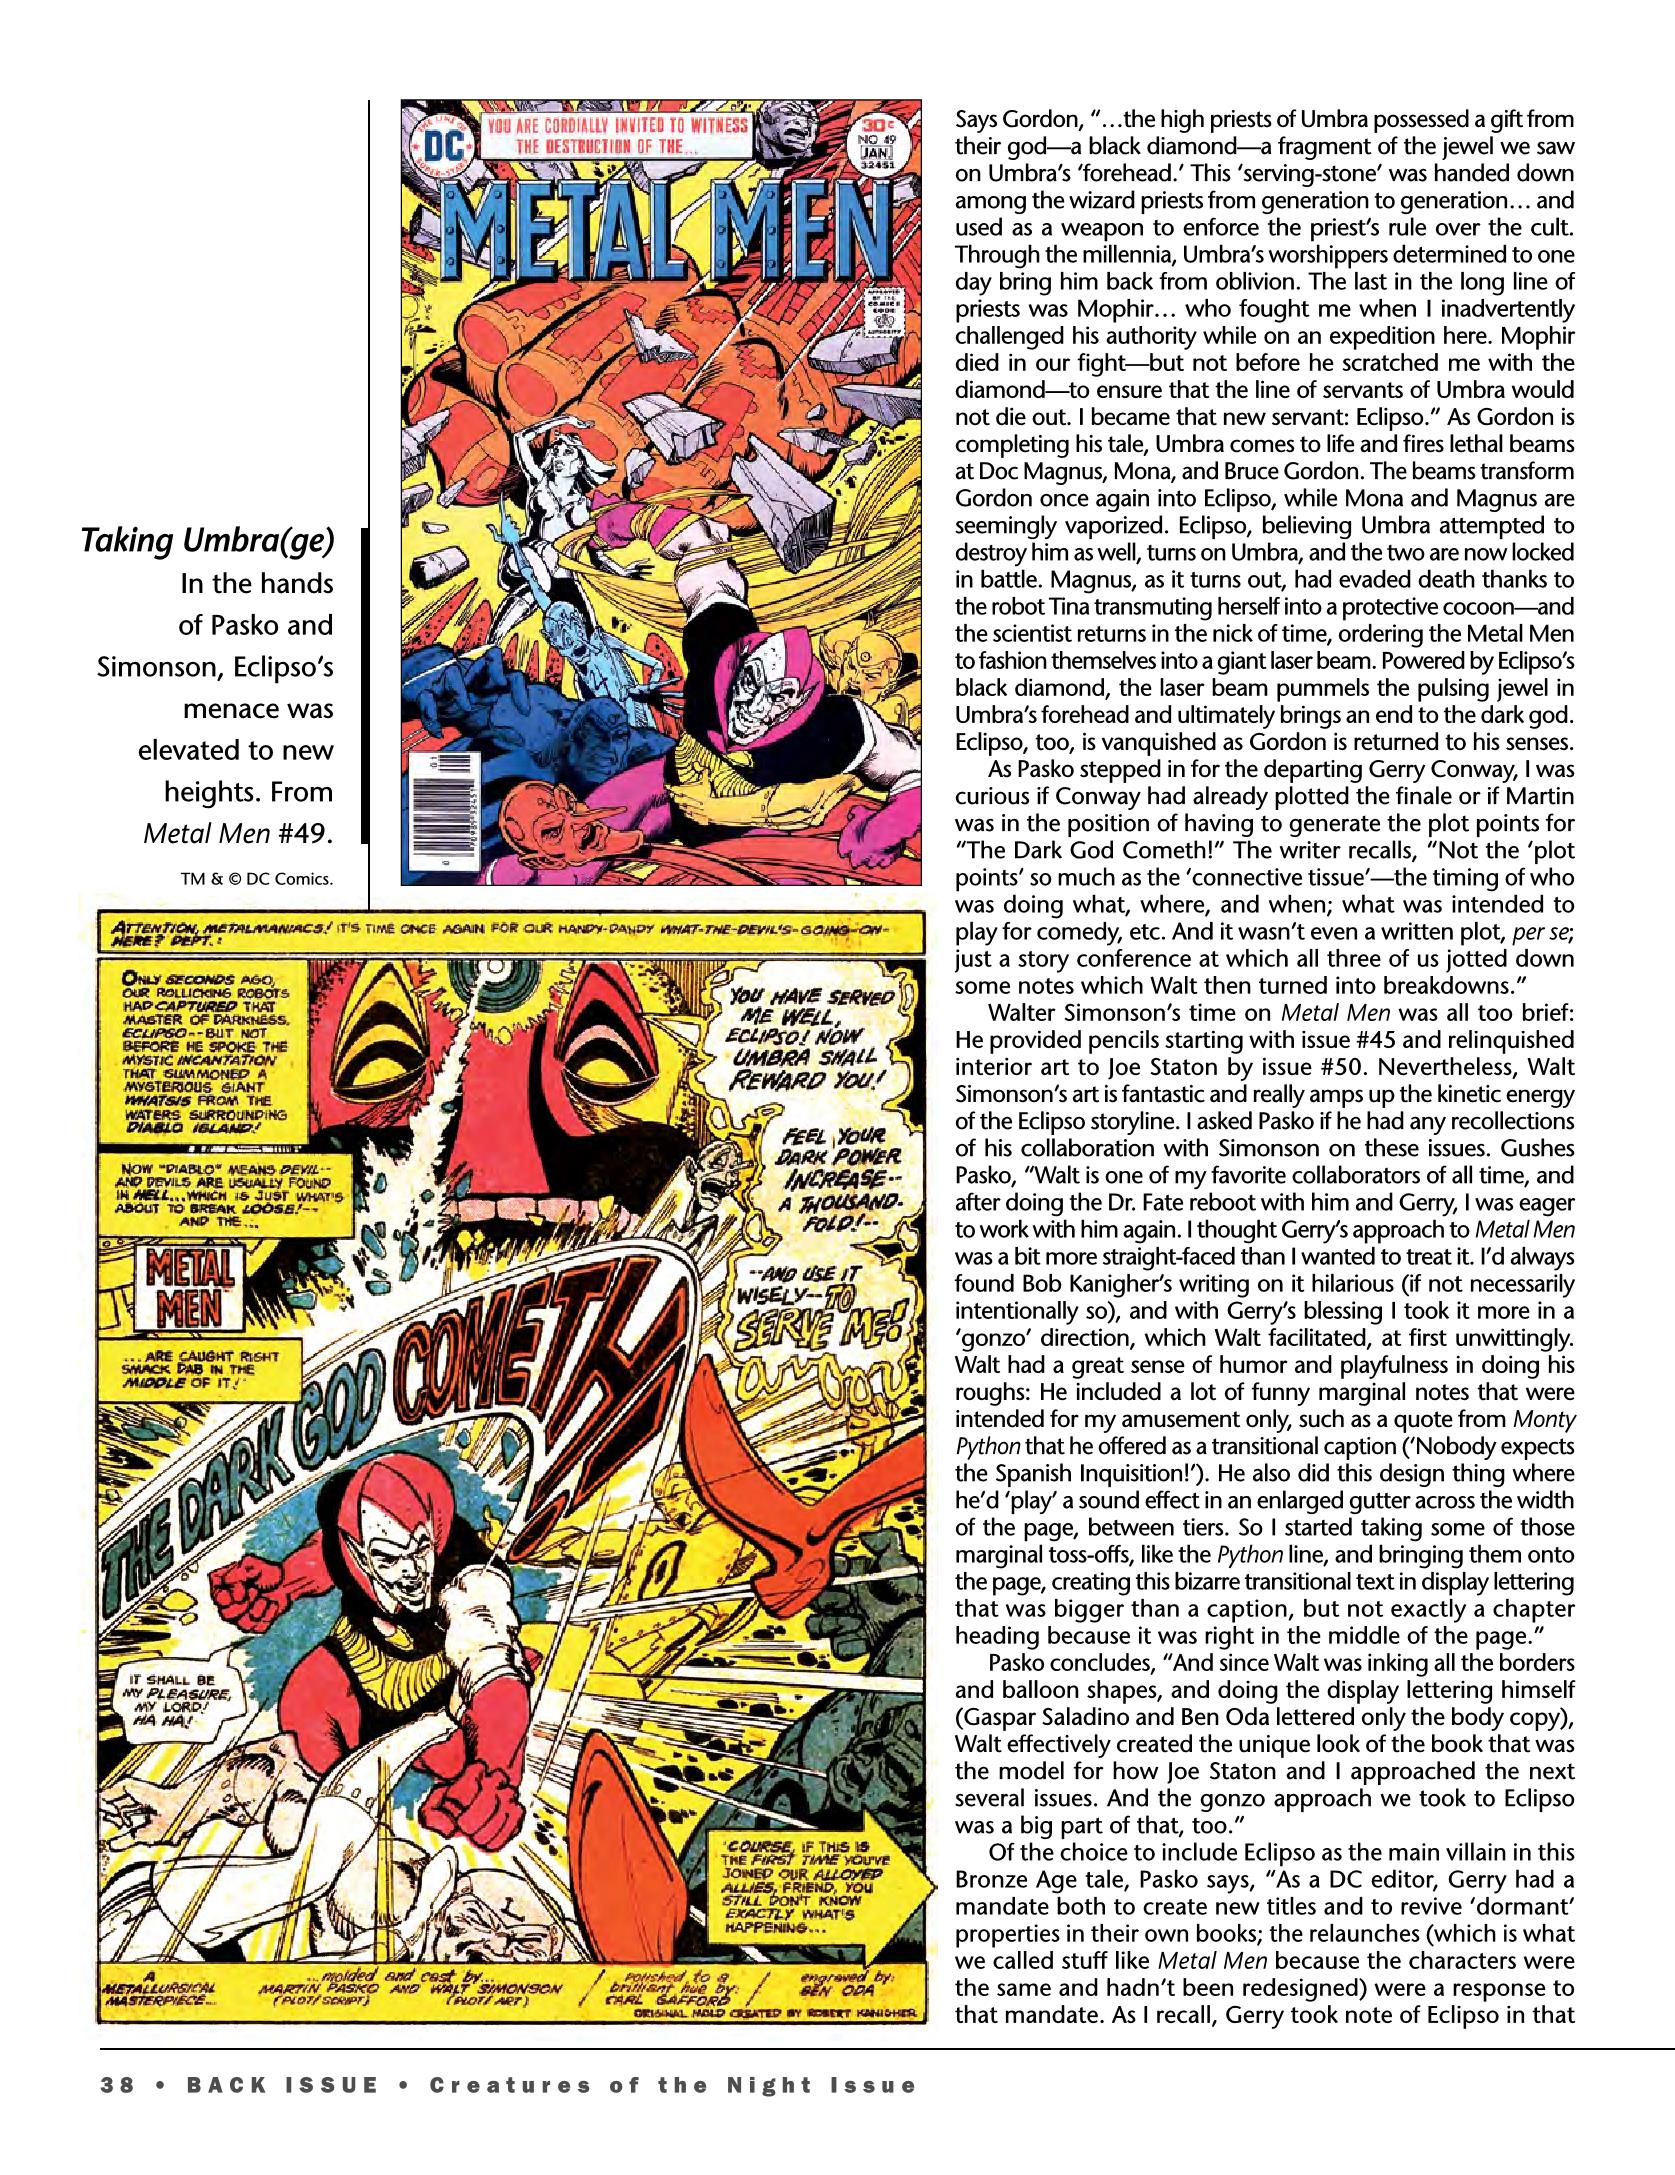 Read online Back Issue comic -  Issue #95 - 35